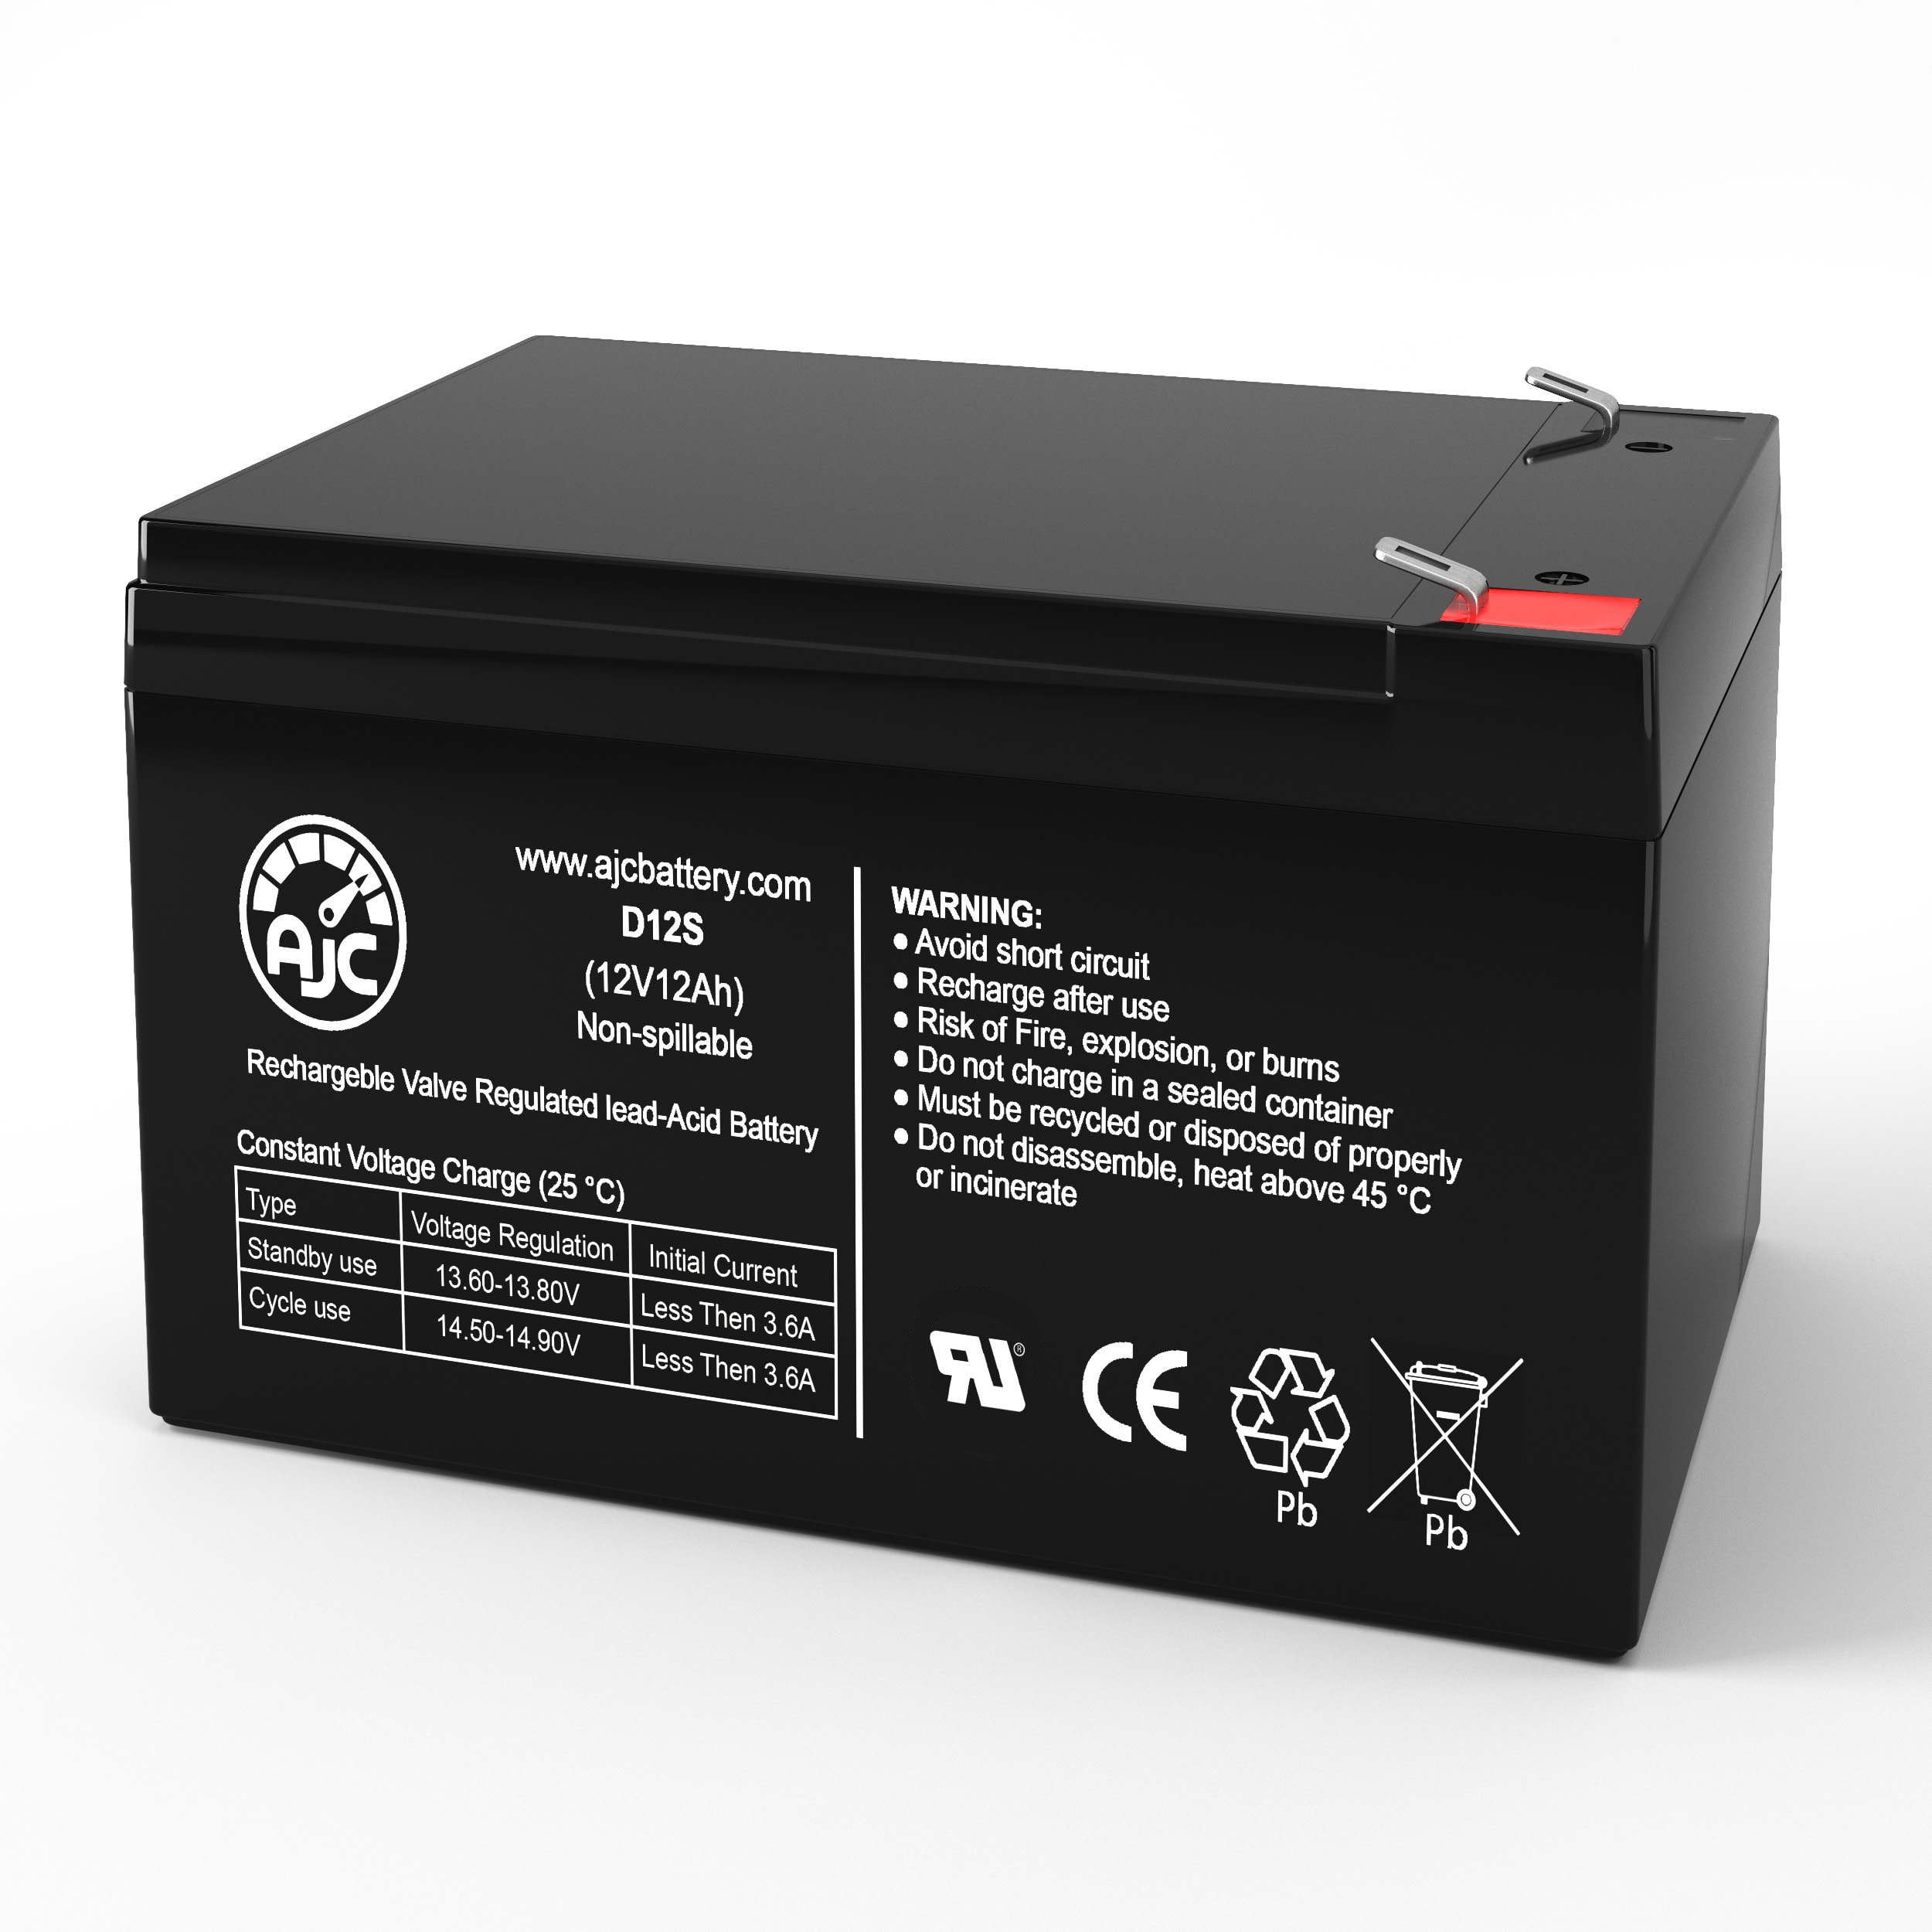 Rascal Electric Mobility Cruza 12V 12Ah Sealed Lead Acid Replacement Battery